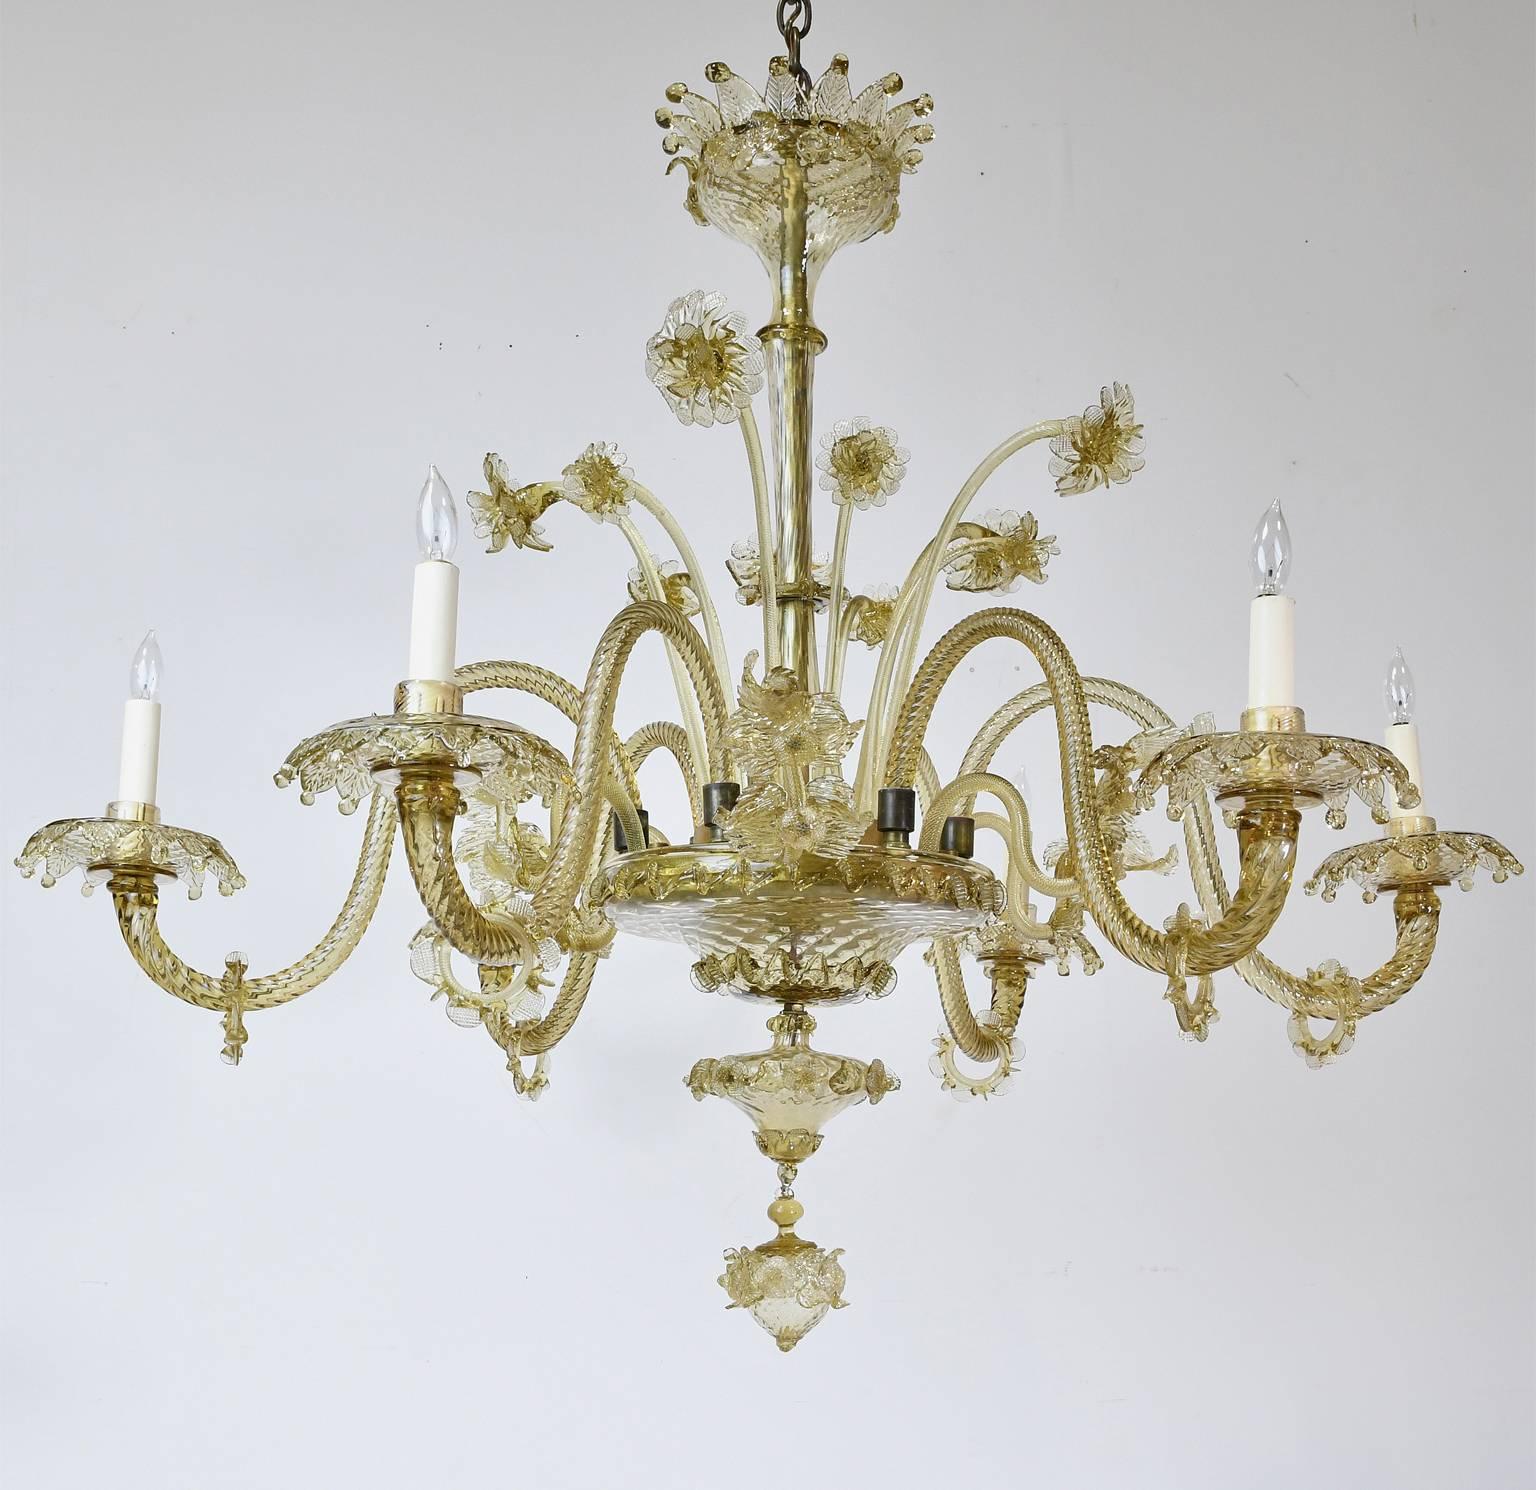 Baroque Revival Large 20th Century Venetian Murano Glass Chandelier with Six Arms